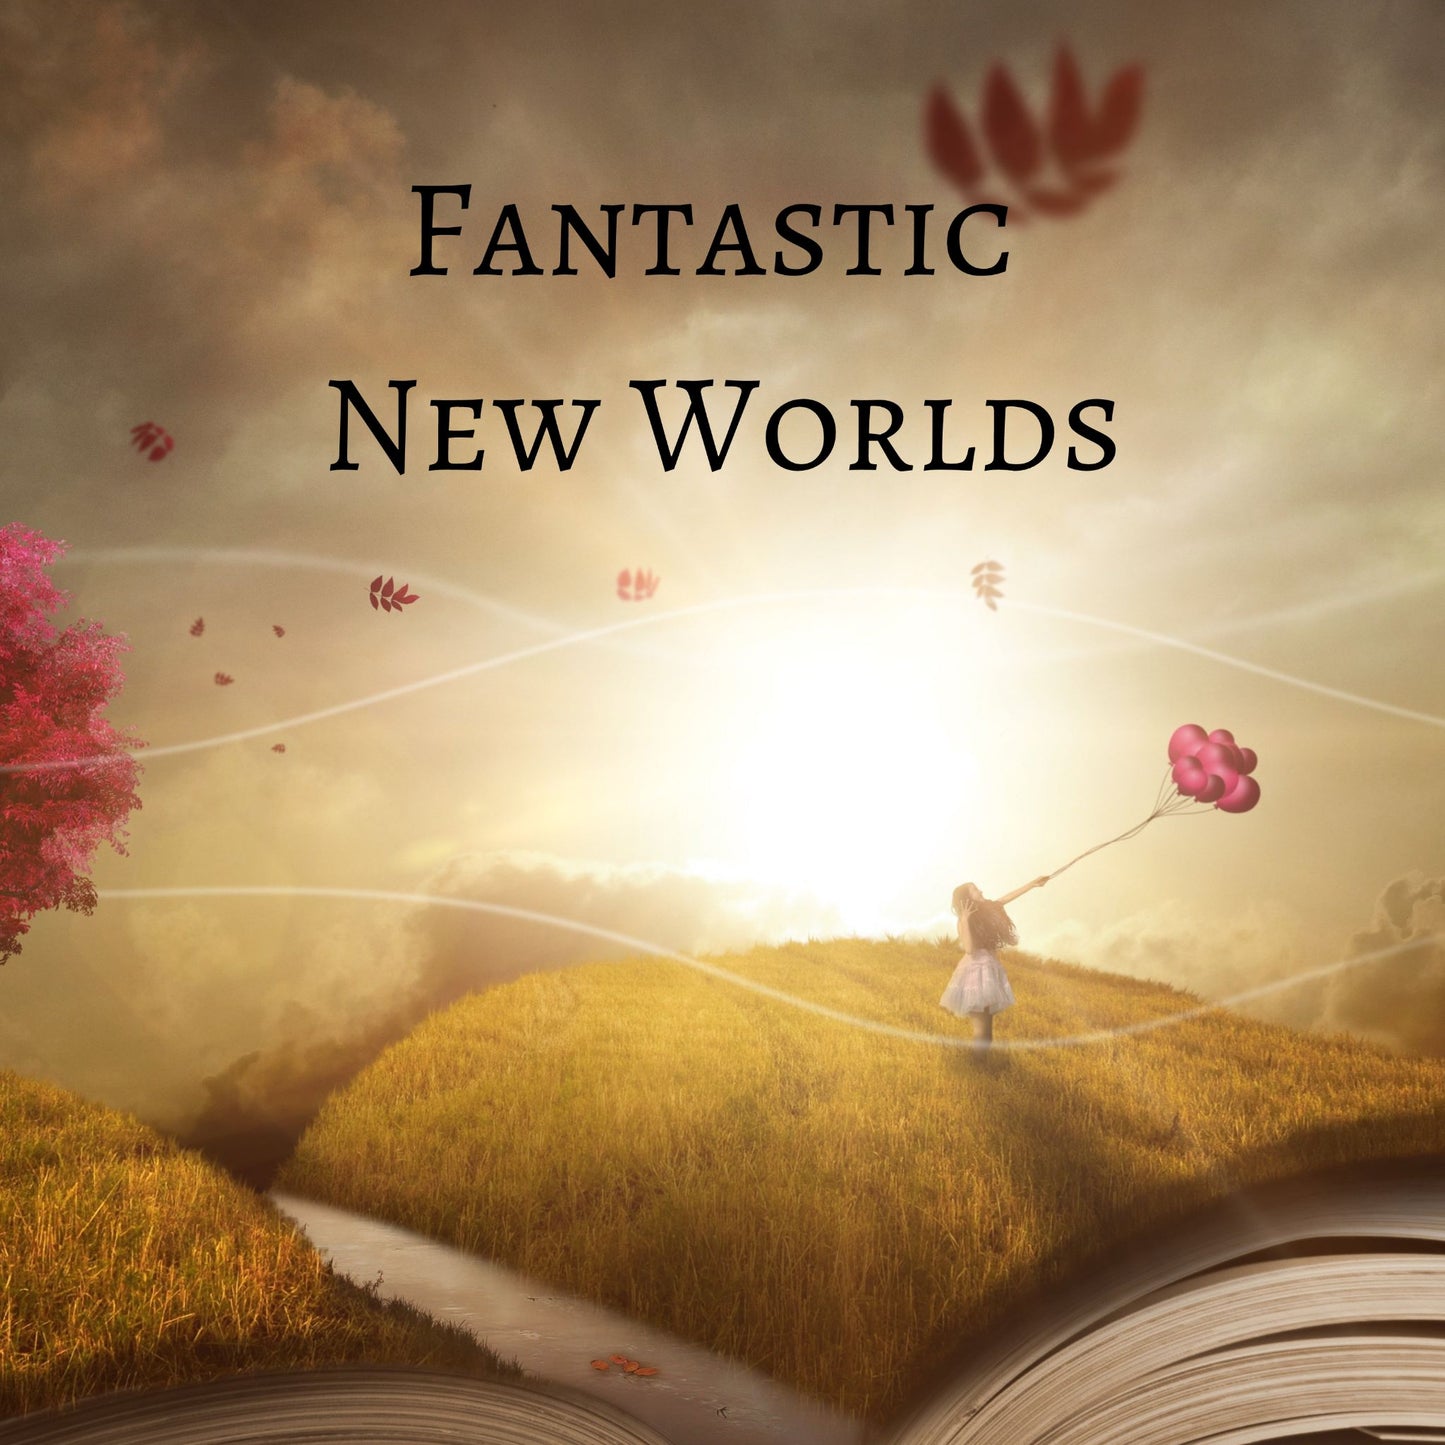 CD Cover of song Fantastic New Worlds